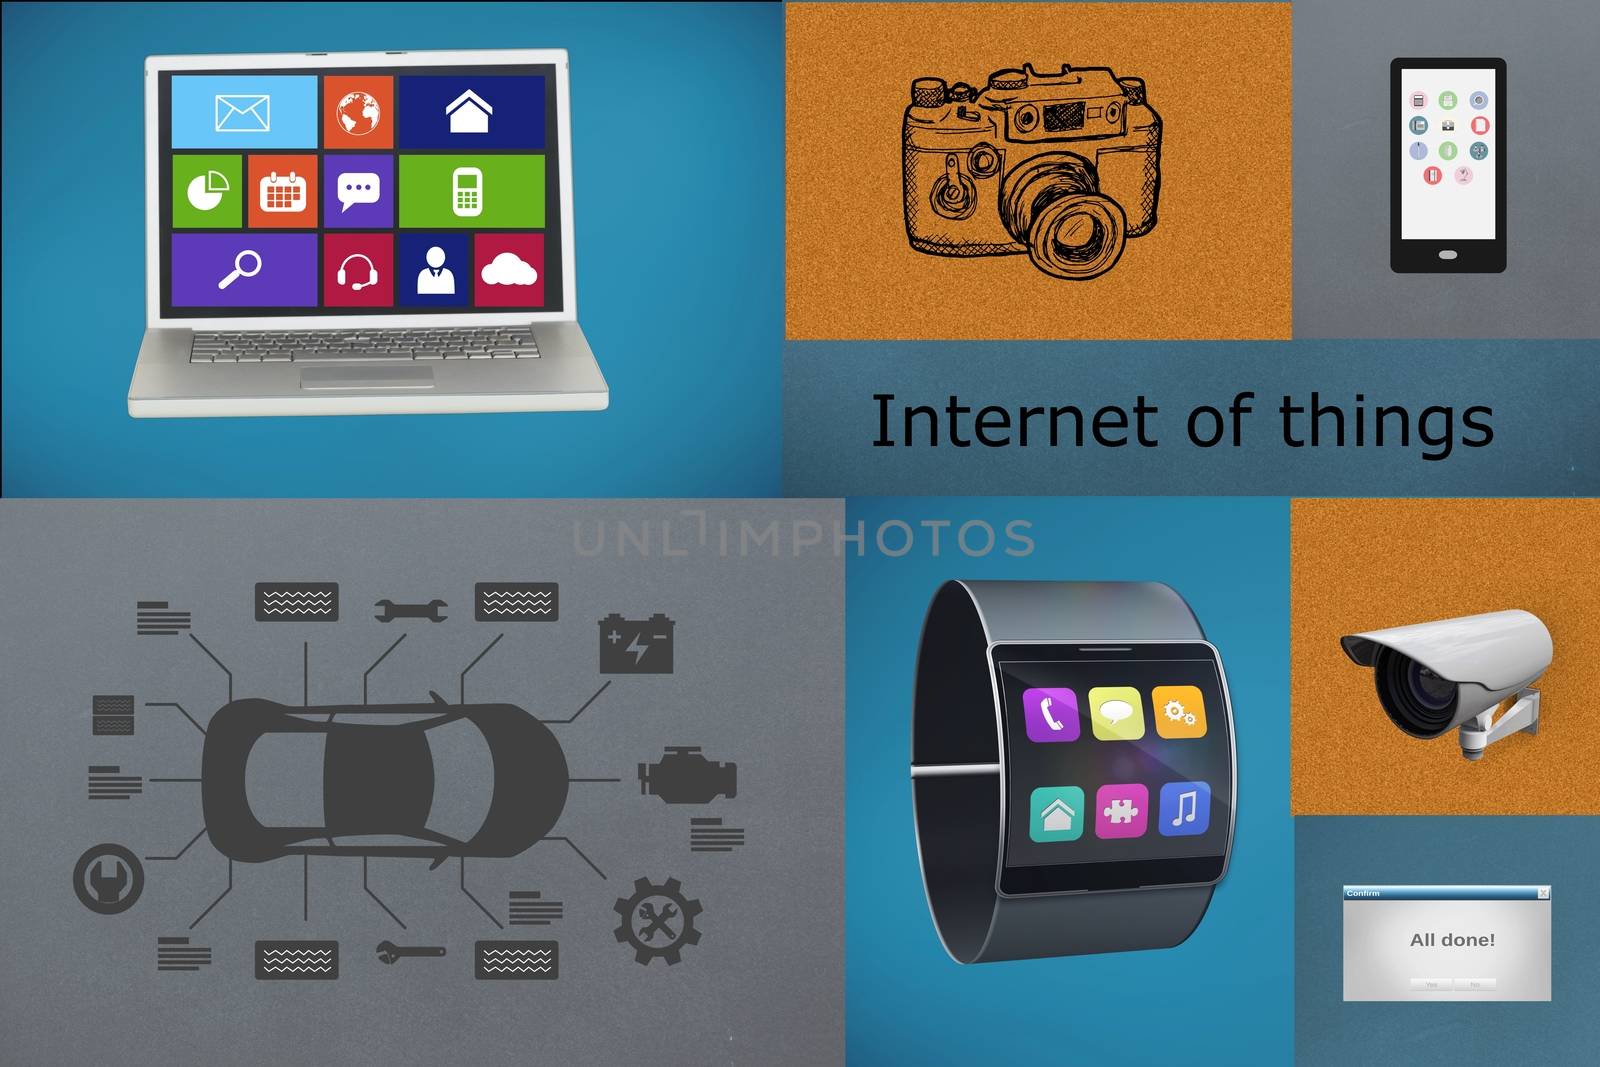 Collage of internet of things with technology